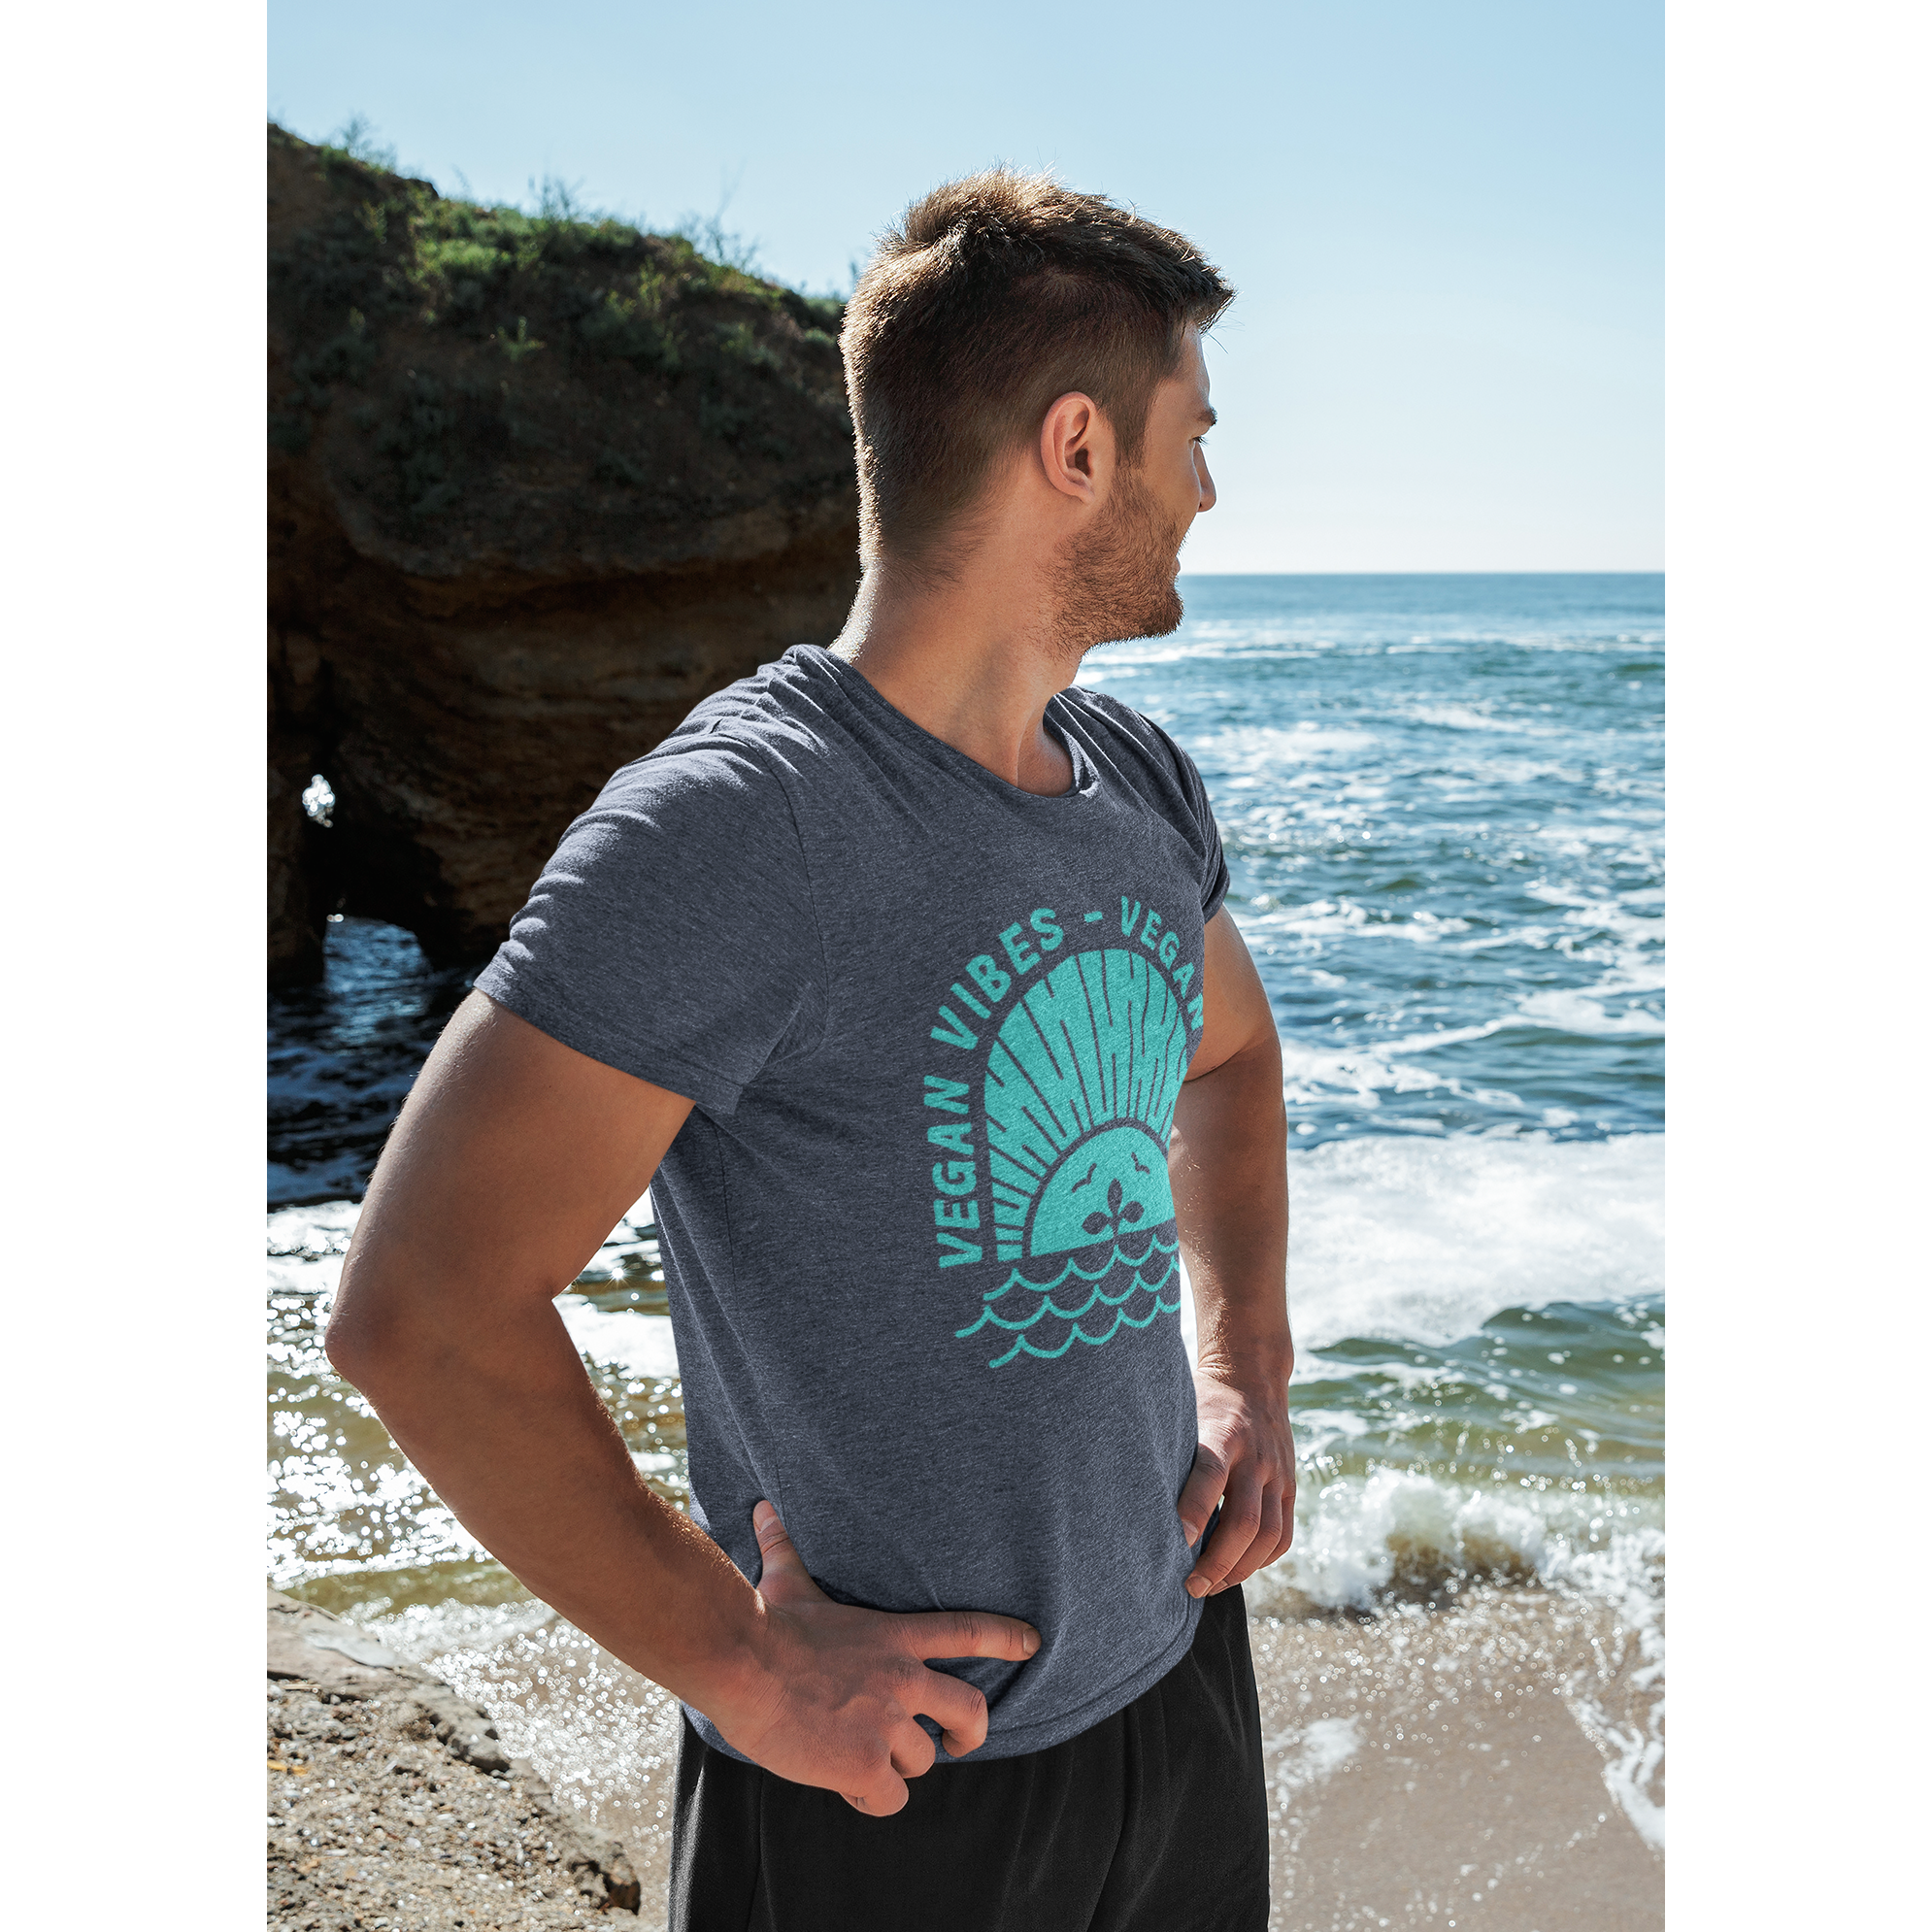 man on the beach wearing a vegan t shirt with a teal vegan vibes design on heather navy colored premium fabric